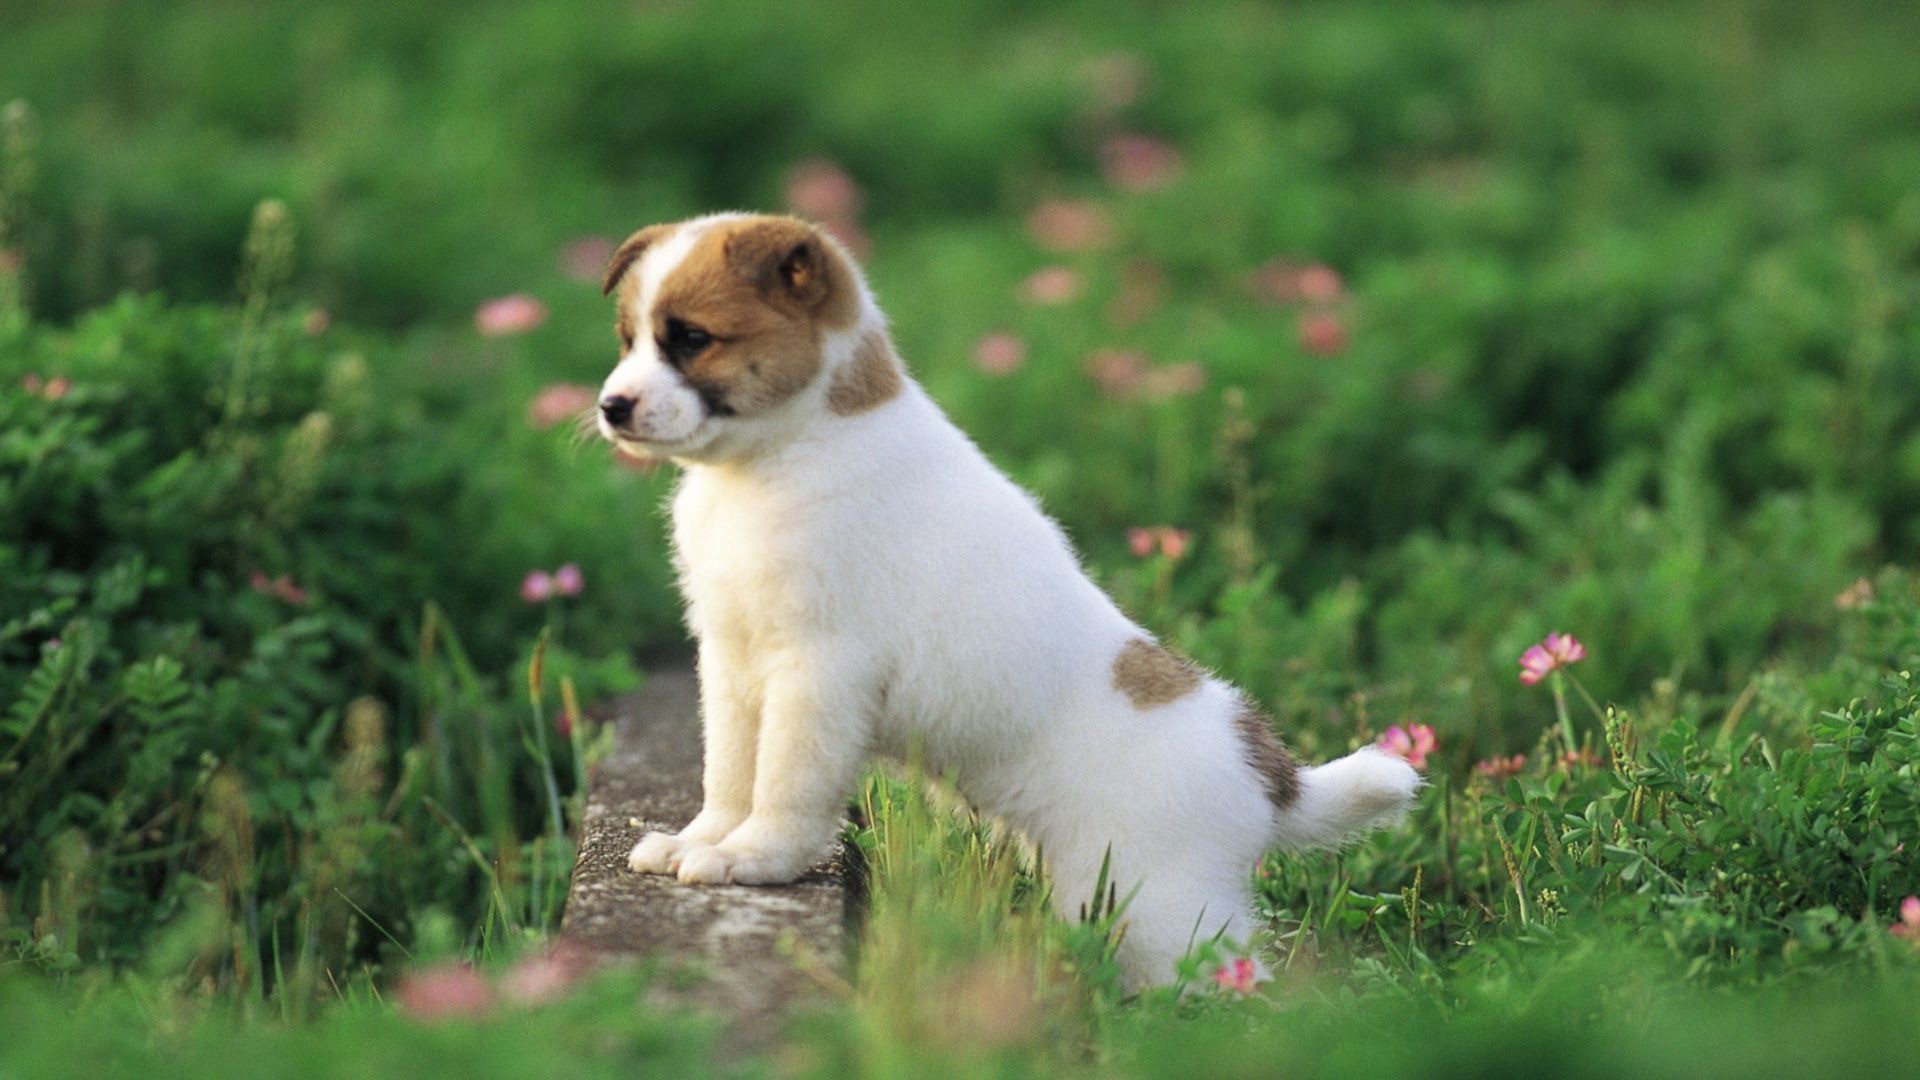 Wallpaper HD Cute Puppies With Resolution 1920X1080